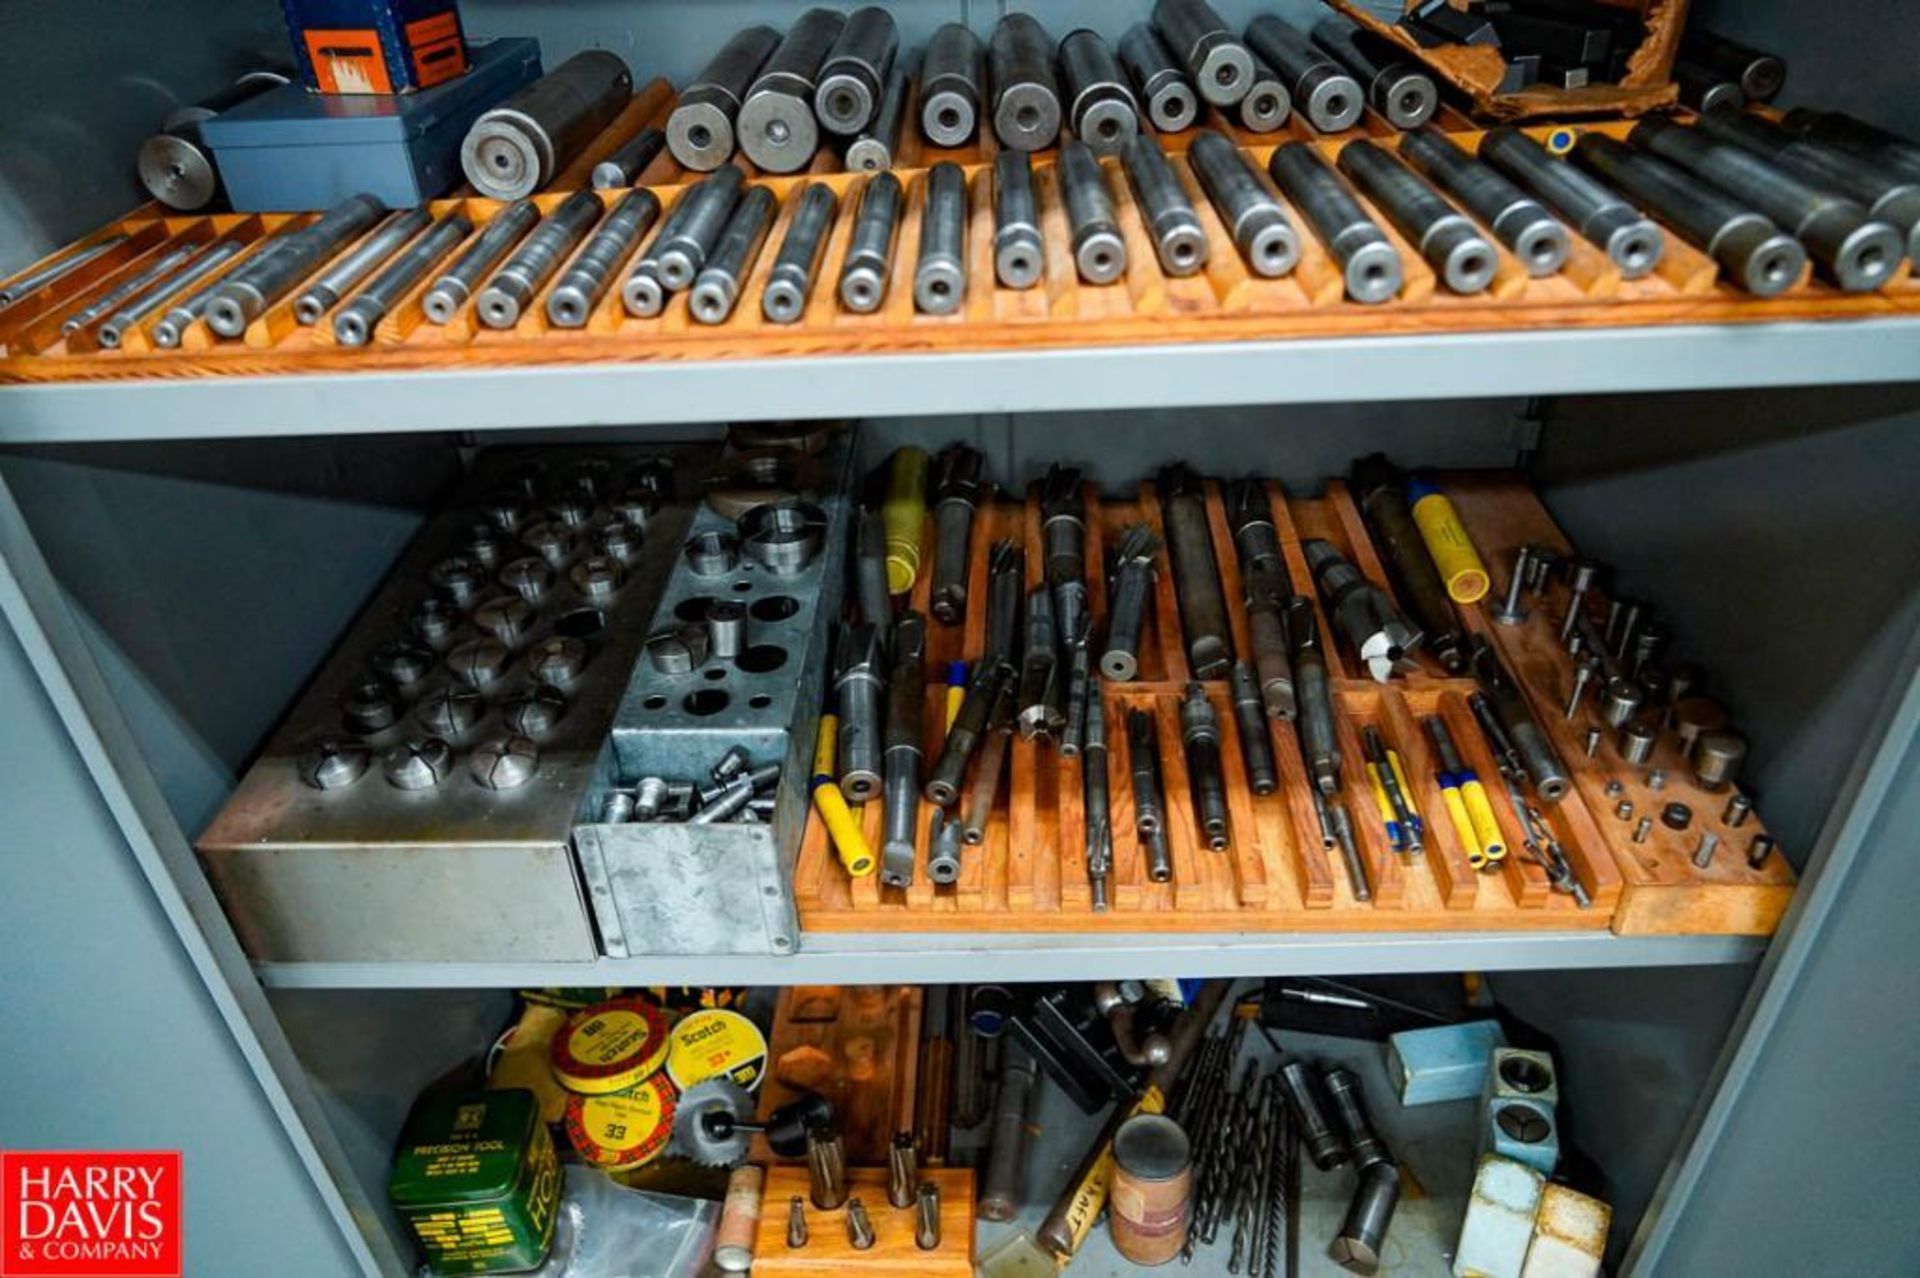 Contents of Tool Storage Crib 1 (3) 2 Door Metal Cabinet Filled with Lathe Tooling Bars, Collets, Dr - Image 10 of 24